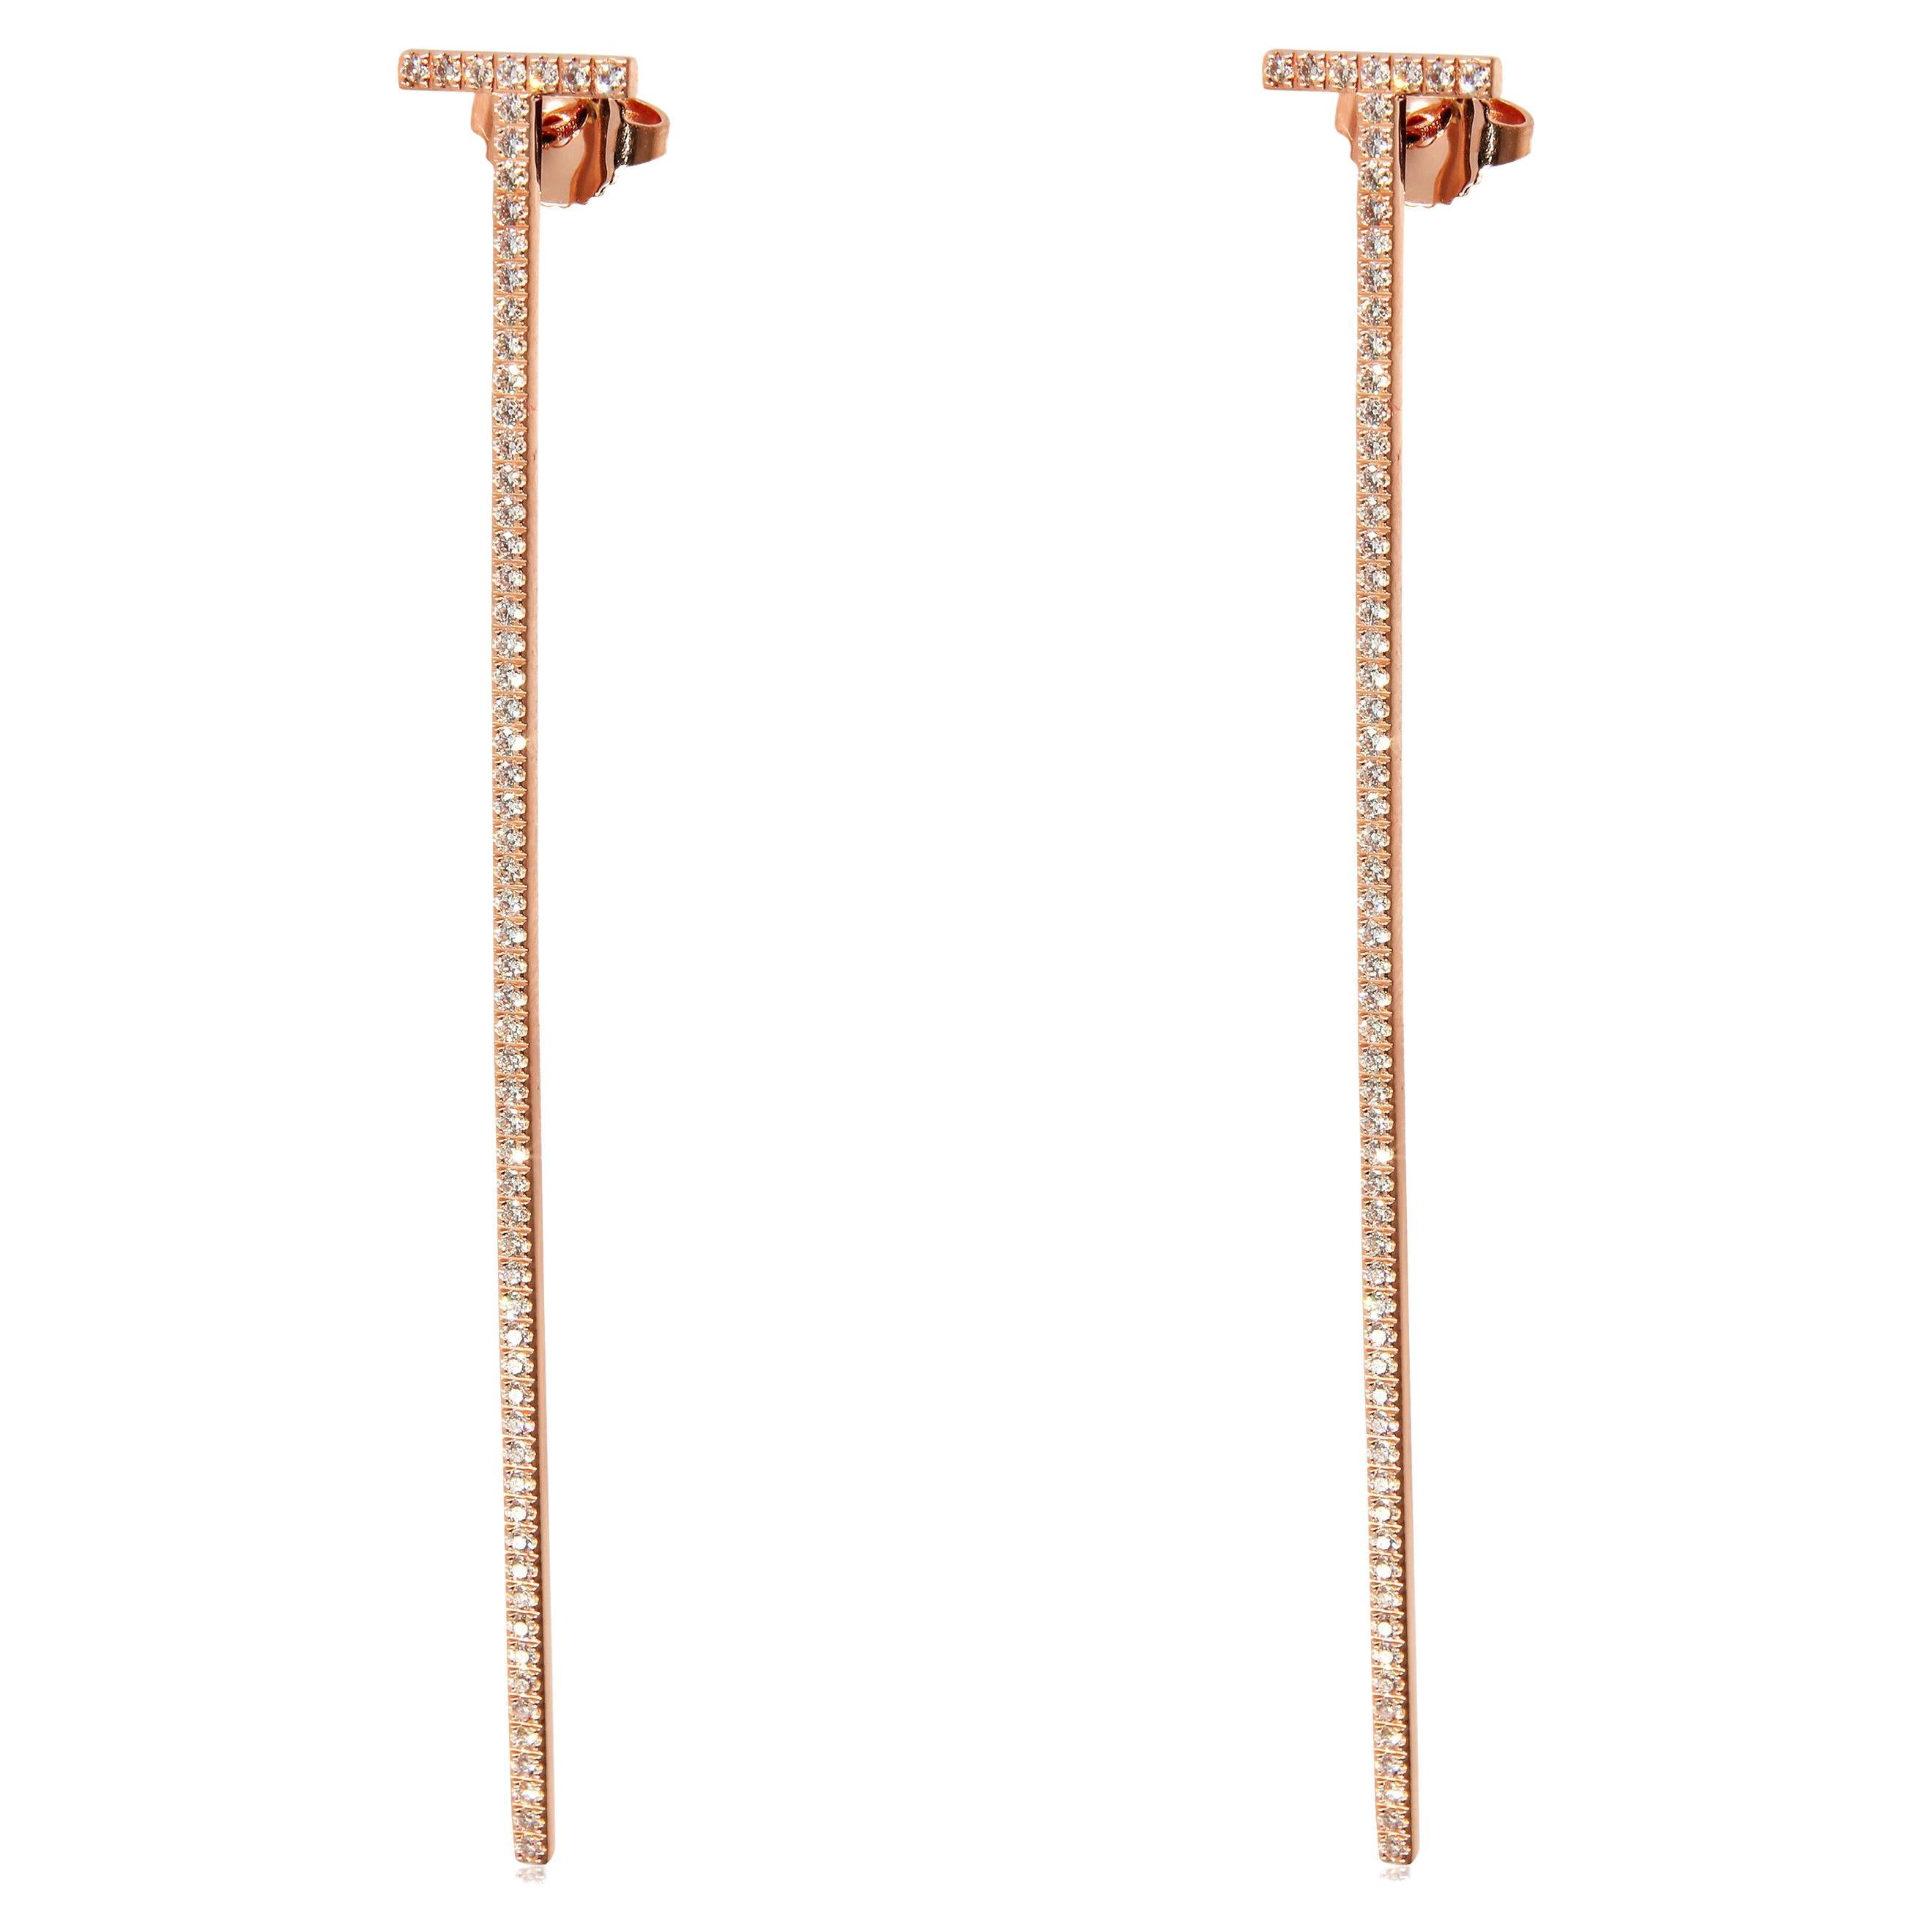 Tiffany & Co. Tiffany T Elongated Wire Bar  Earrings in 18K Rose Gold 0.47 CTW For Sale